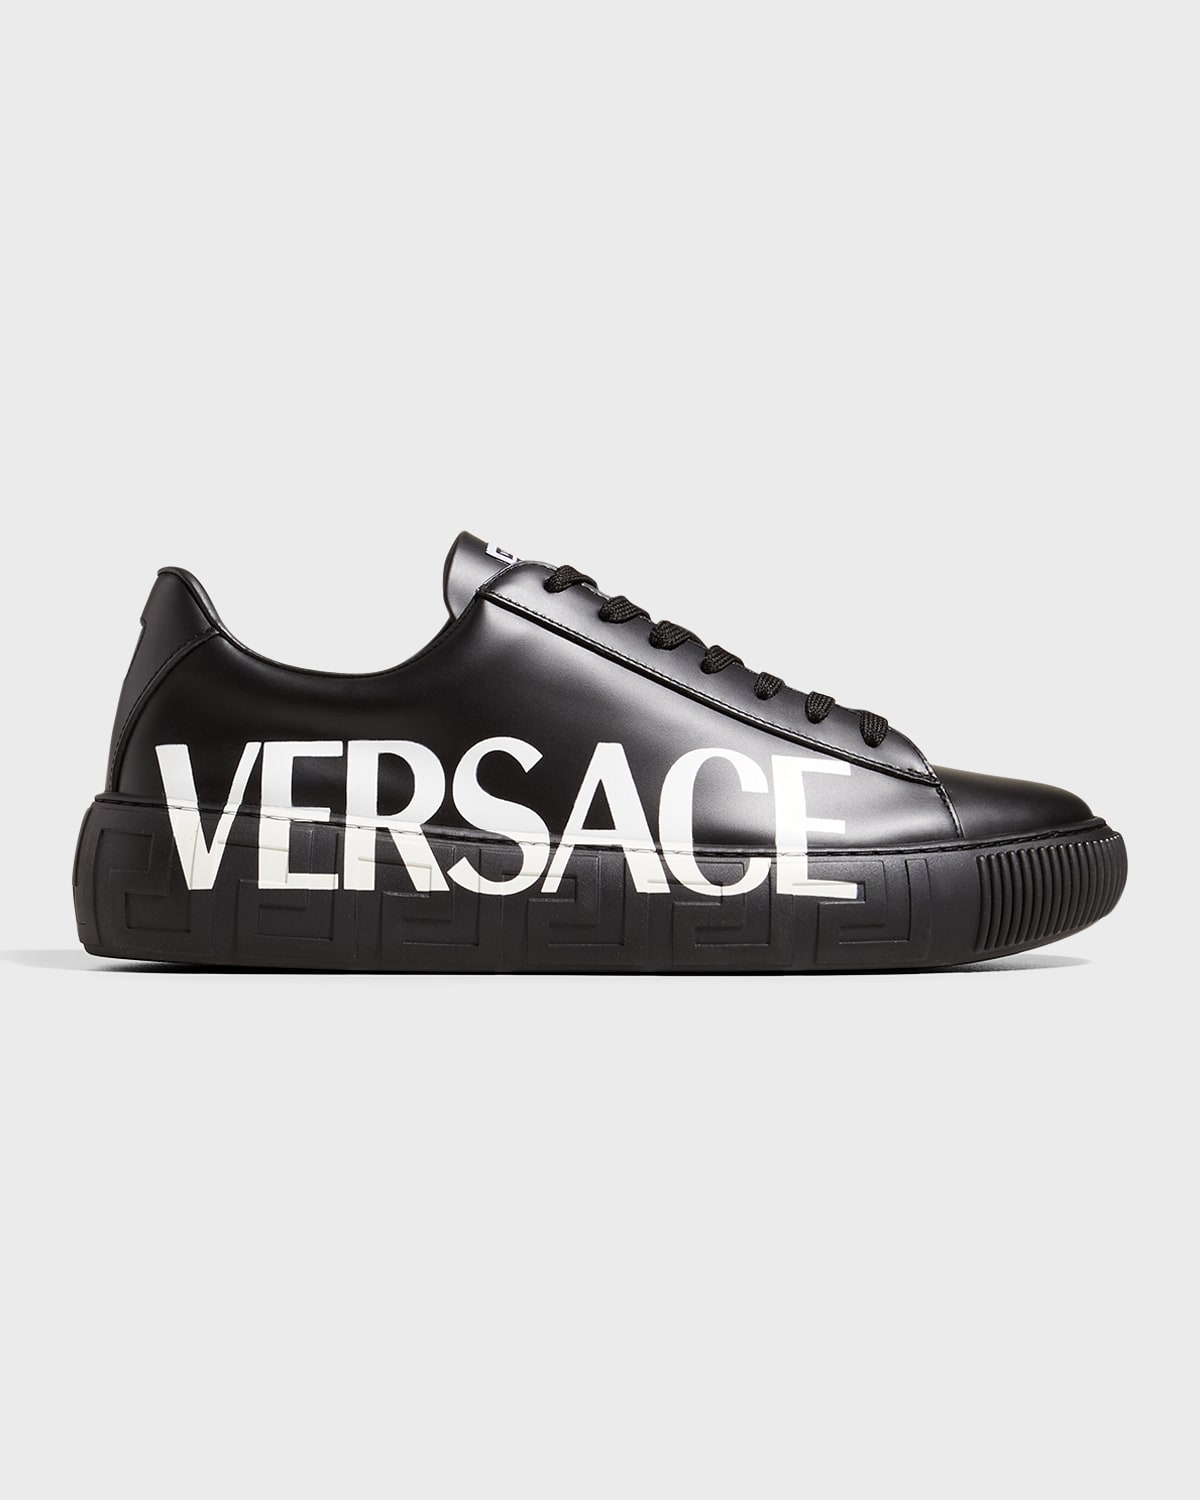 New MENS VERSACE JEANS NAVY BLUE NYLON LACE Sneakers Mono 